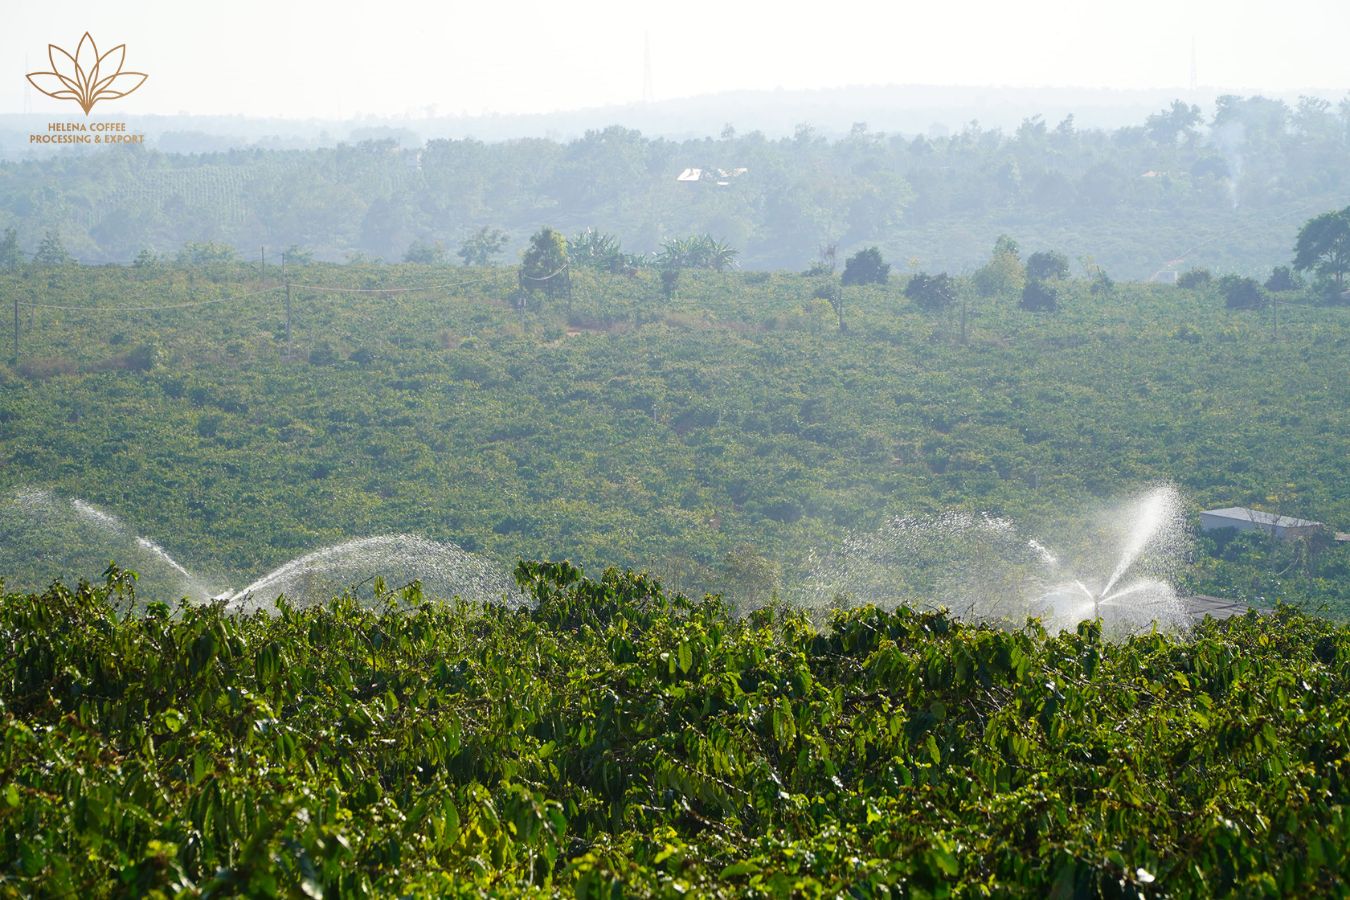 Farming 07: The Role Of Irrigation Water In Coffee Production - Helena Coffee Vietnam